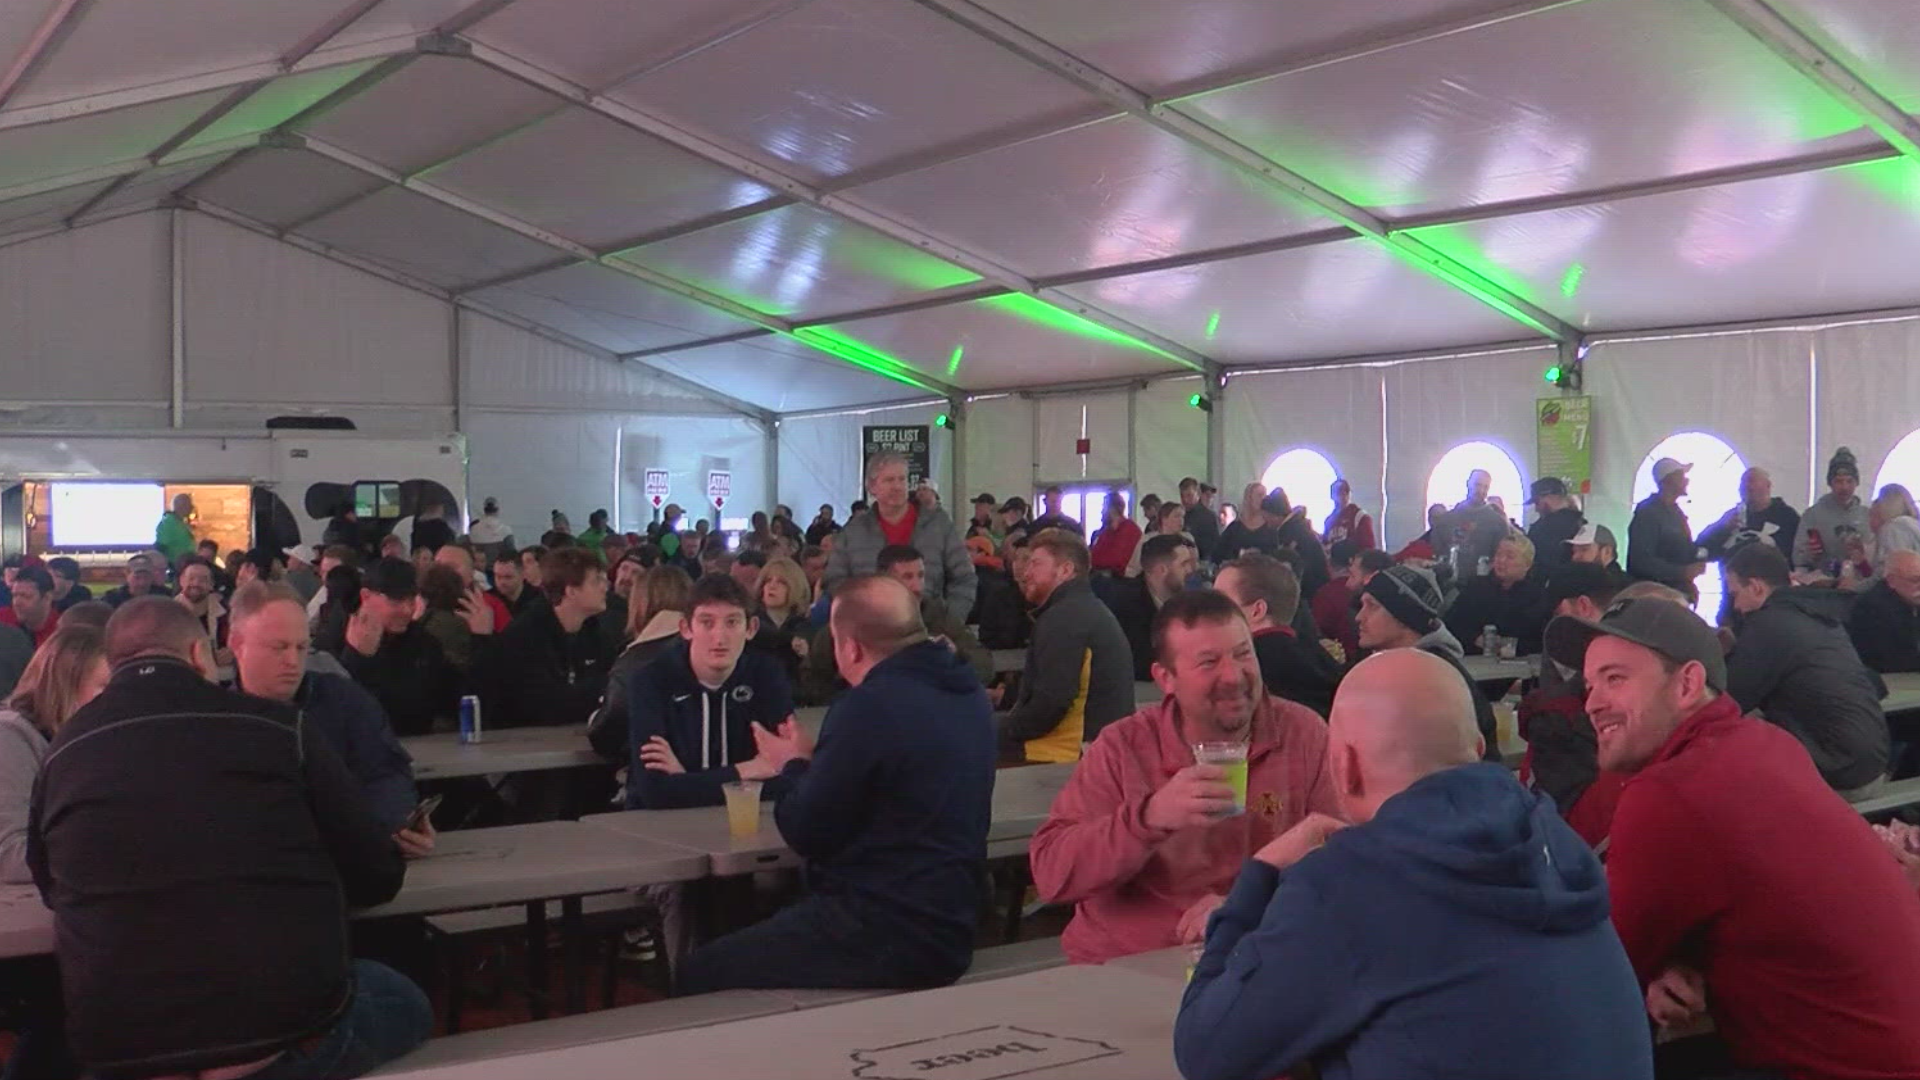 Check out the heated tent, enjoy some craft beer and watch all the games from 10 a.m. to 10 p.m. Friday and Saturday in downtown Des Moines.